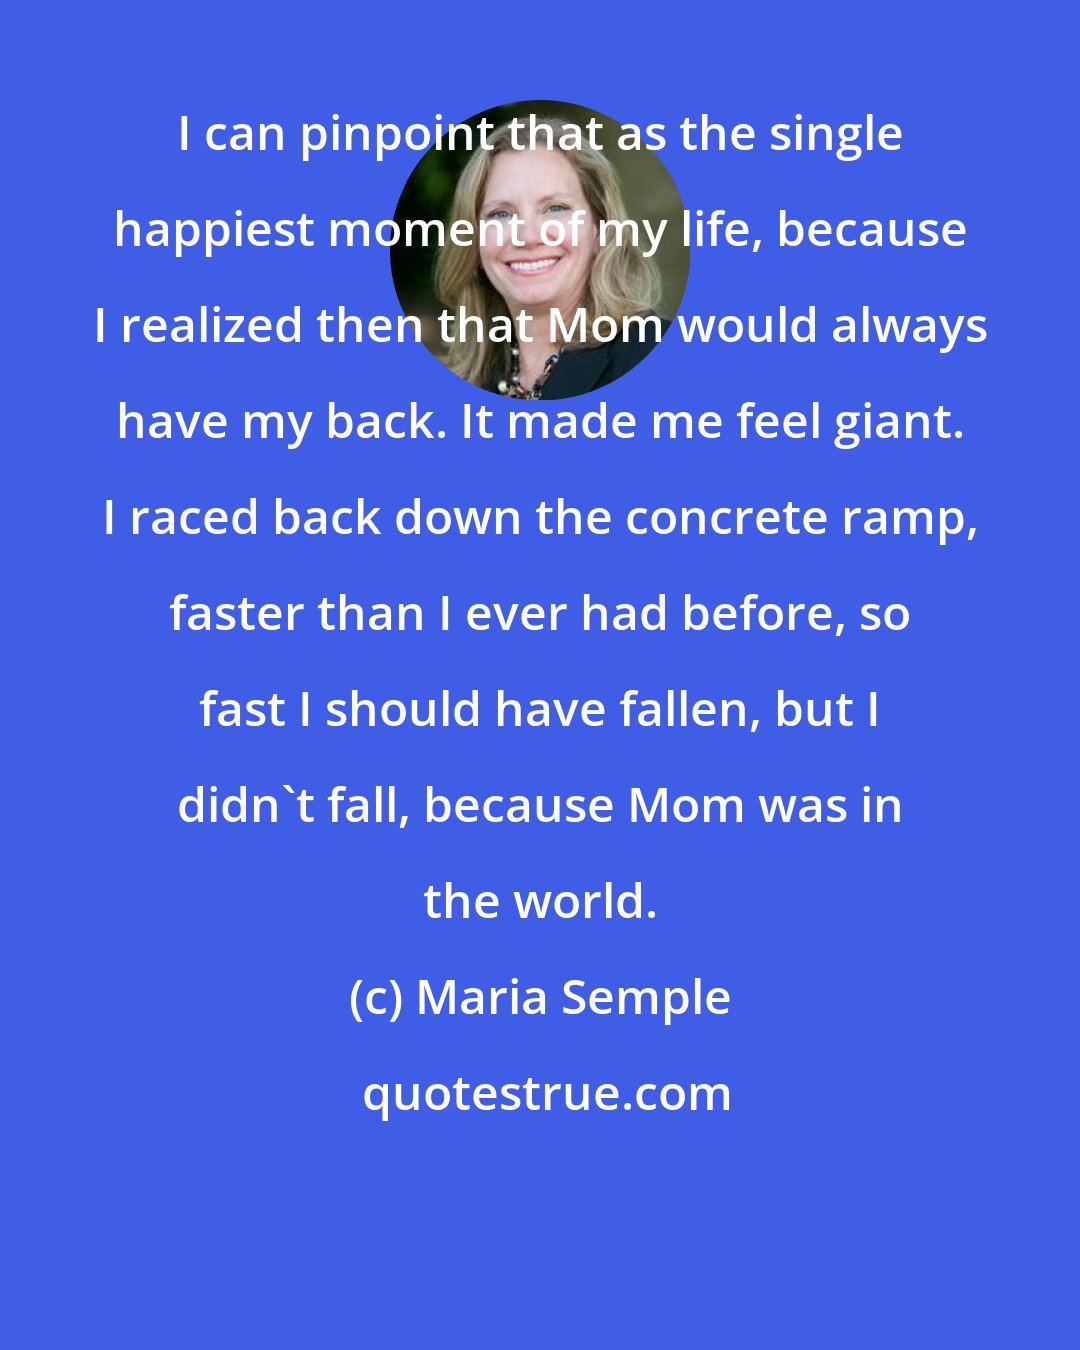 Maria Semple: I can pinpoint that as the single happiest moment of my life, because I realized then that Mom would always have my back. It made me feel giant. I raced back down the concrete ramp, faster than I ever had before, so fast I should have fallen, but I didn't fall, because Mom was in the world.